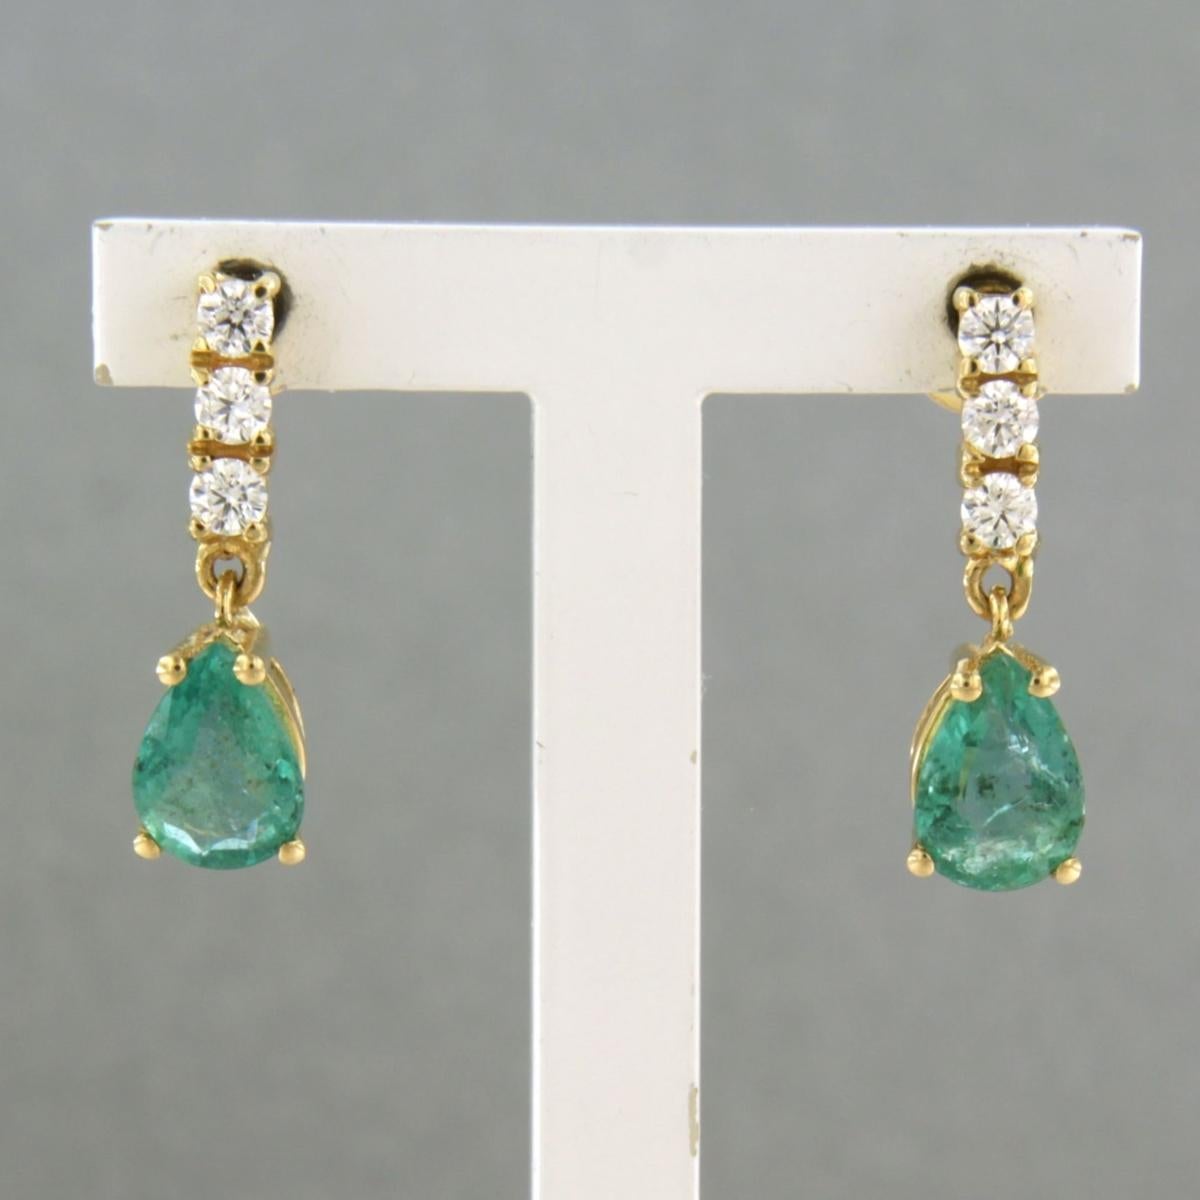 18k yellow gold earrings set with emeralds. 1.28ct and brilliant cut diamond up to. 0.24ct - F/G - VS/SI

Detailed description:

the size of the earring is 1.7 cm long by 5.0 mm wide

Total weight 2.4 grams

set with

- 2 x 7.0 mm x 5.0 mm drop